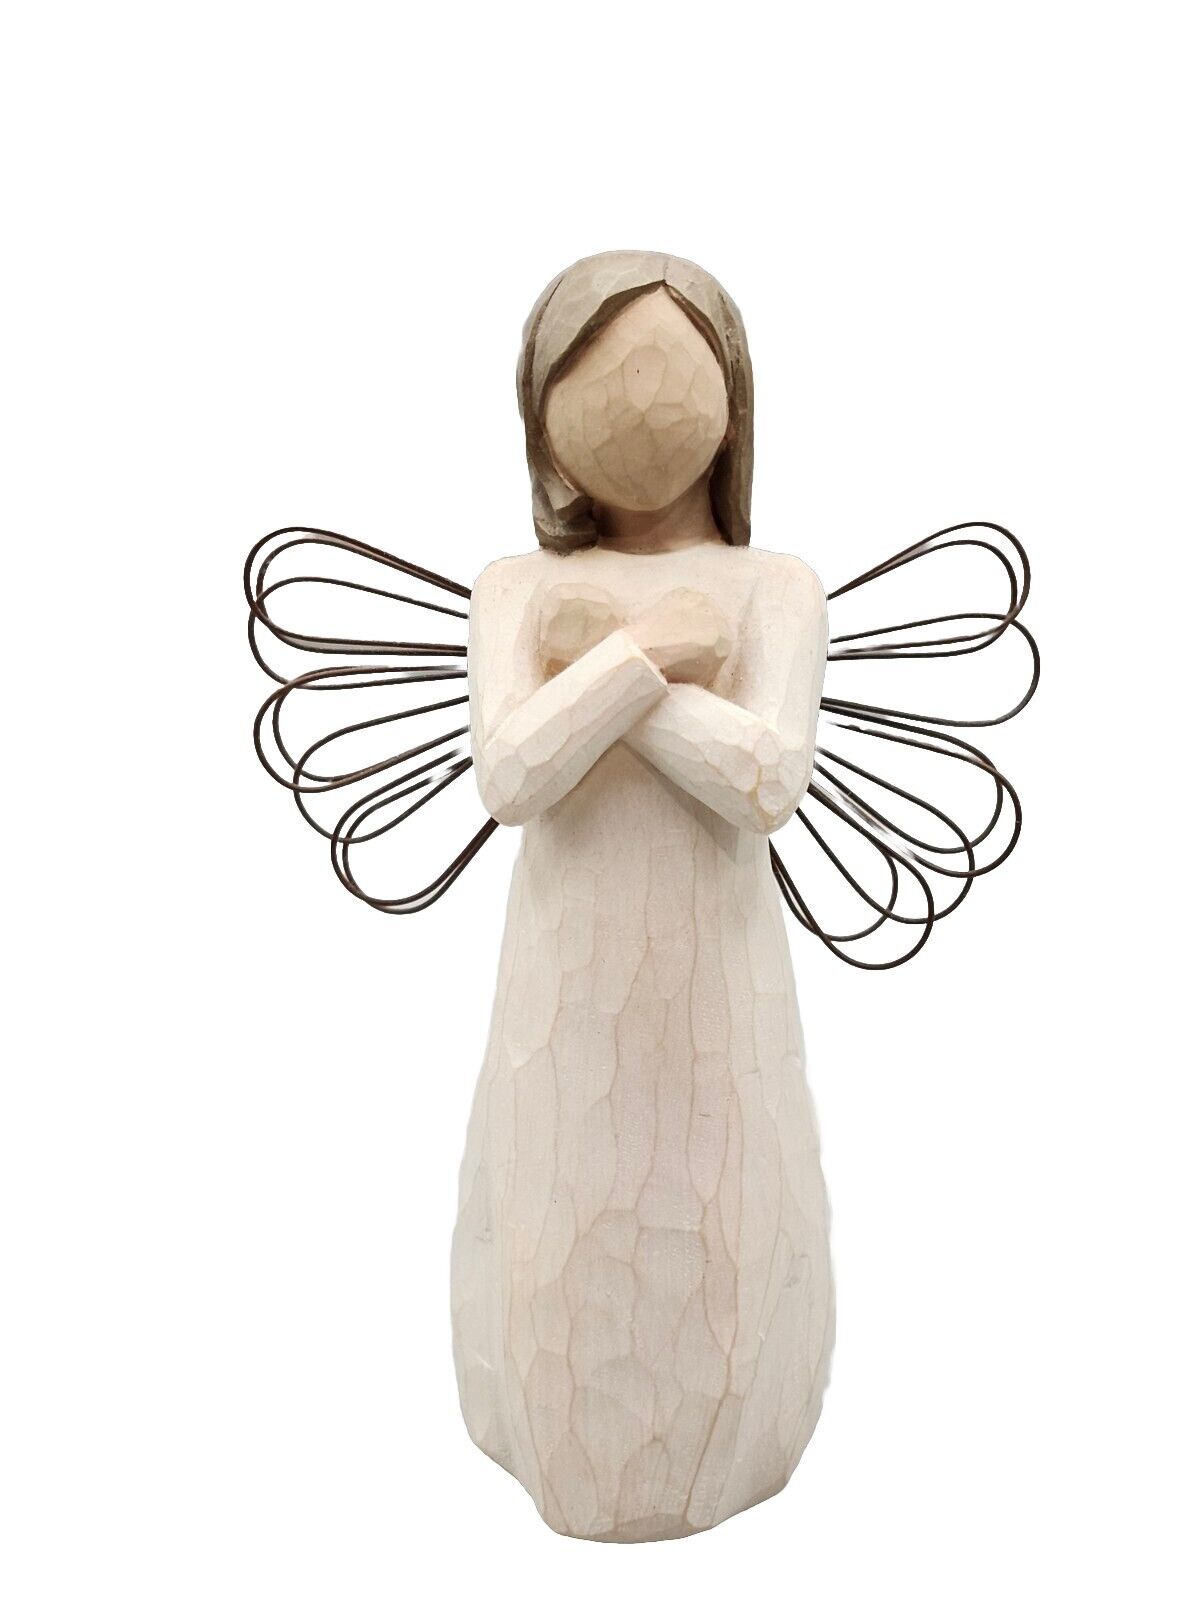 Willow Tree Sign for Love Demdaco Figurine 5.5 Inch by Susan Lordi